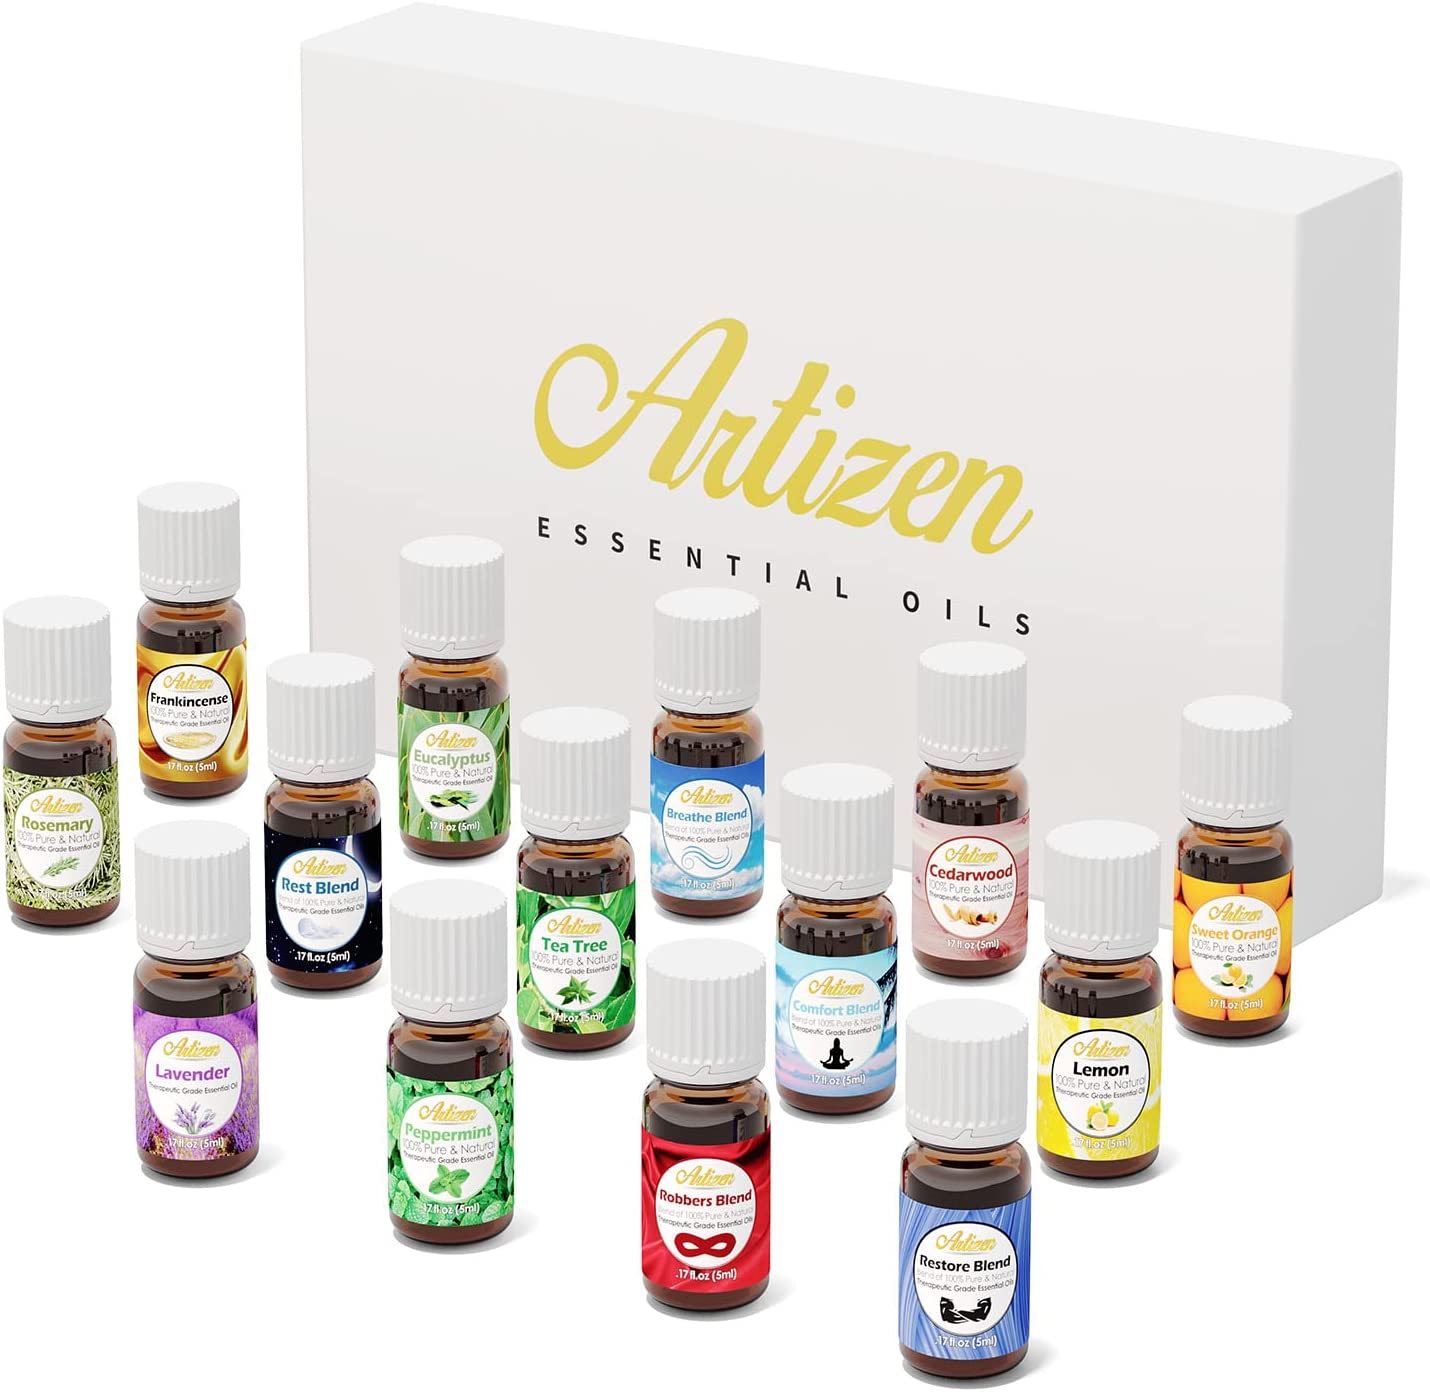 Artizen Top 14 Essential Oil Set for Diffuser, Aromatherapy and Candle Making - Fall Holiday Fragrance Scents with Lavender, Frankincense, Eucalyptus Oils and More - image 1 of 6